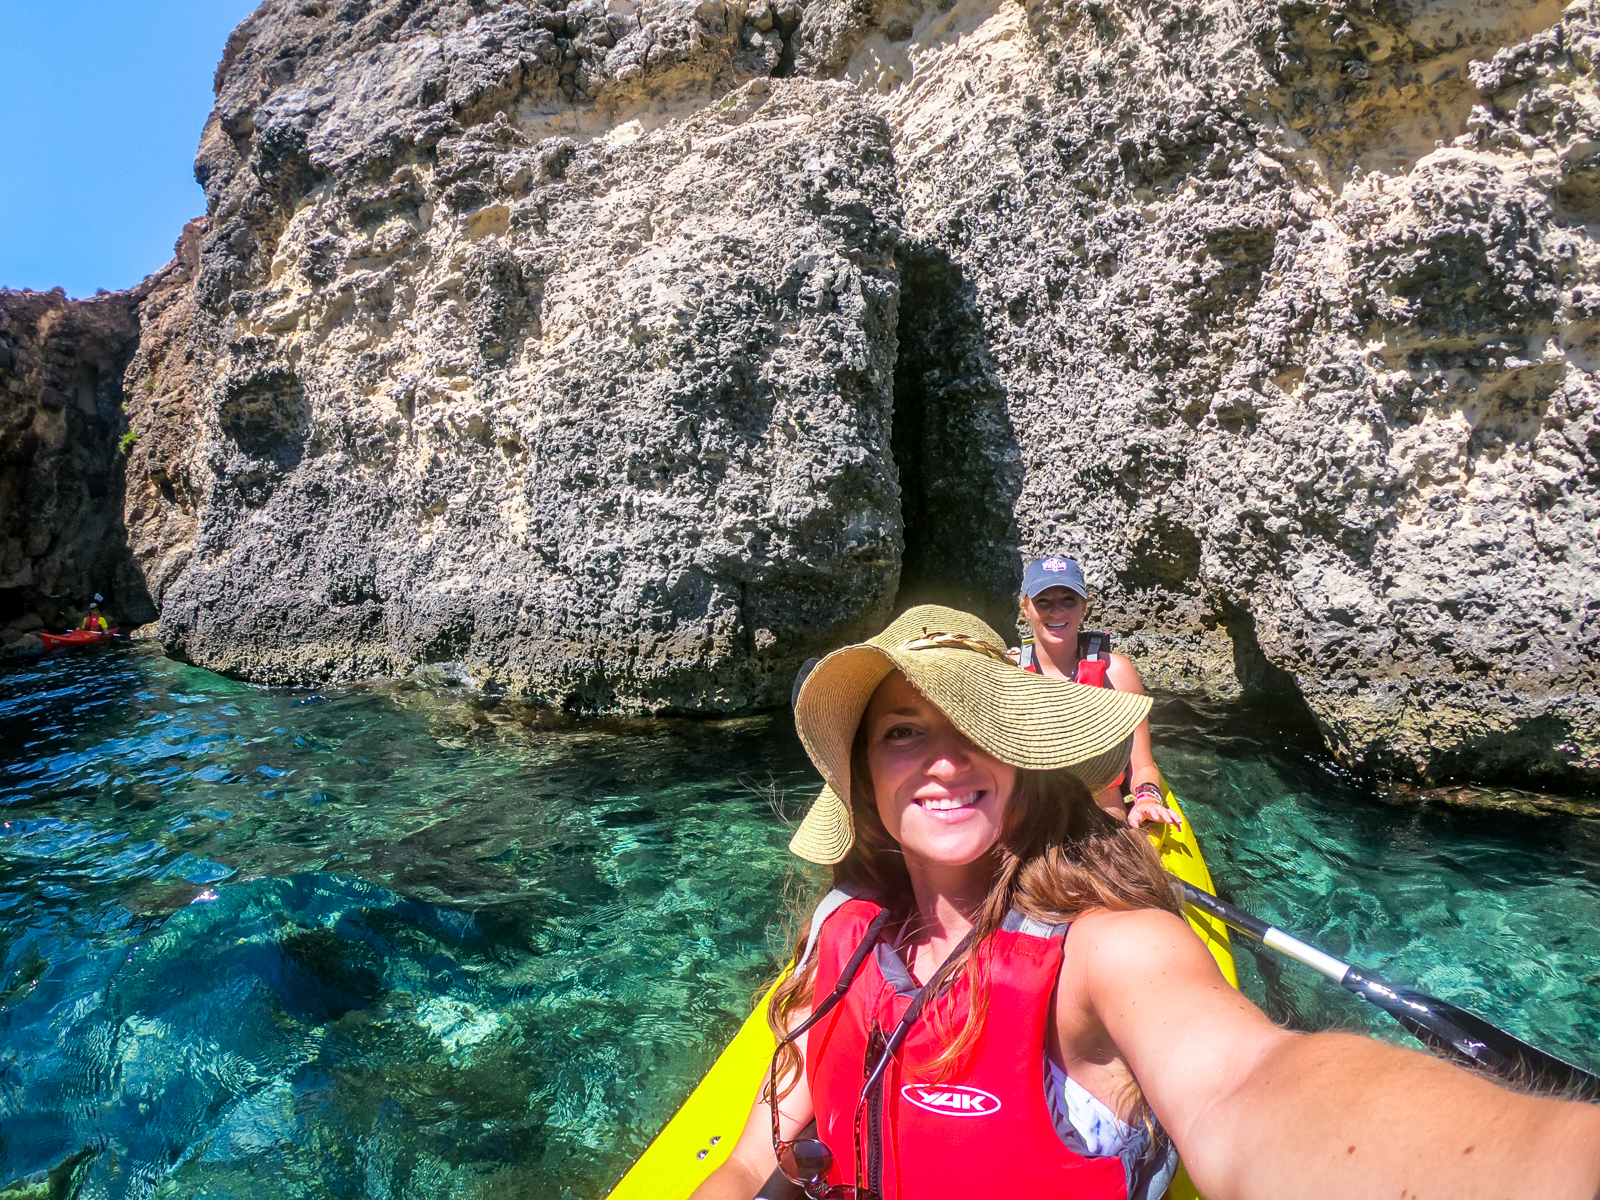 Kayaking out of a narrow cave